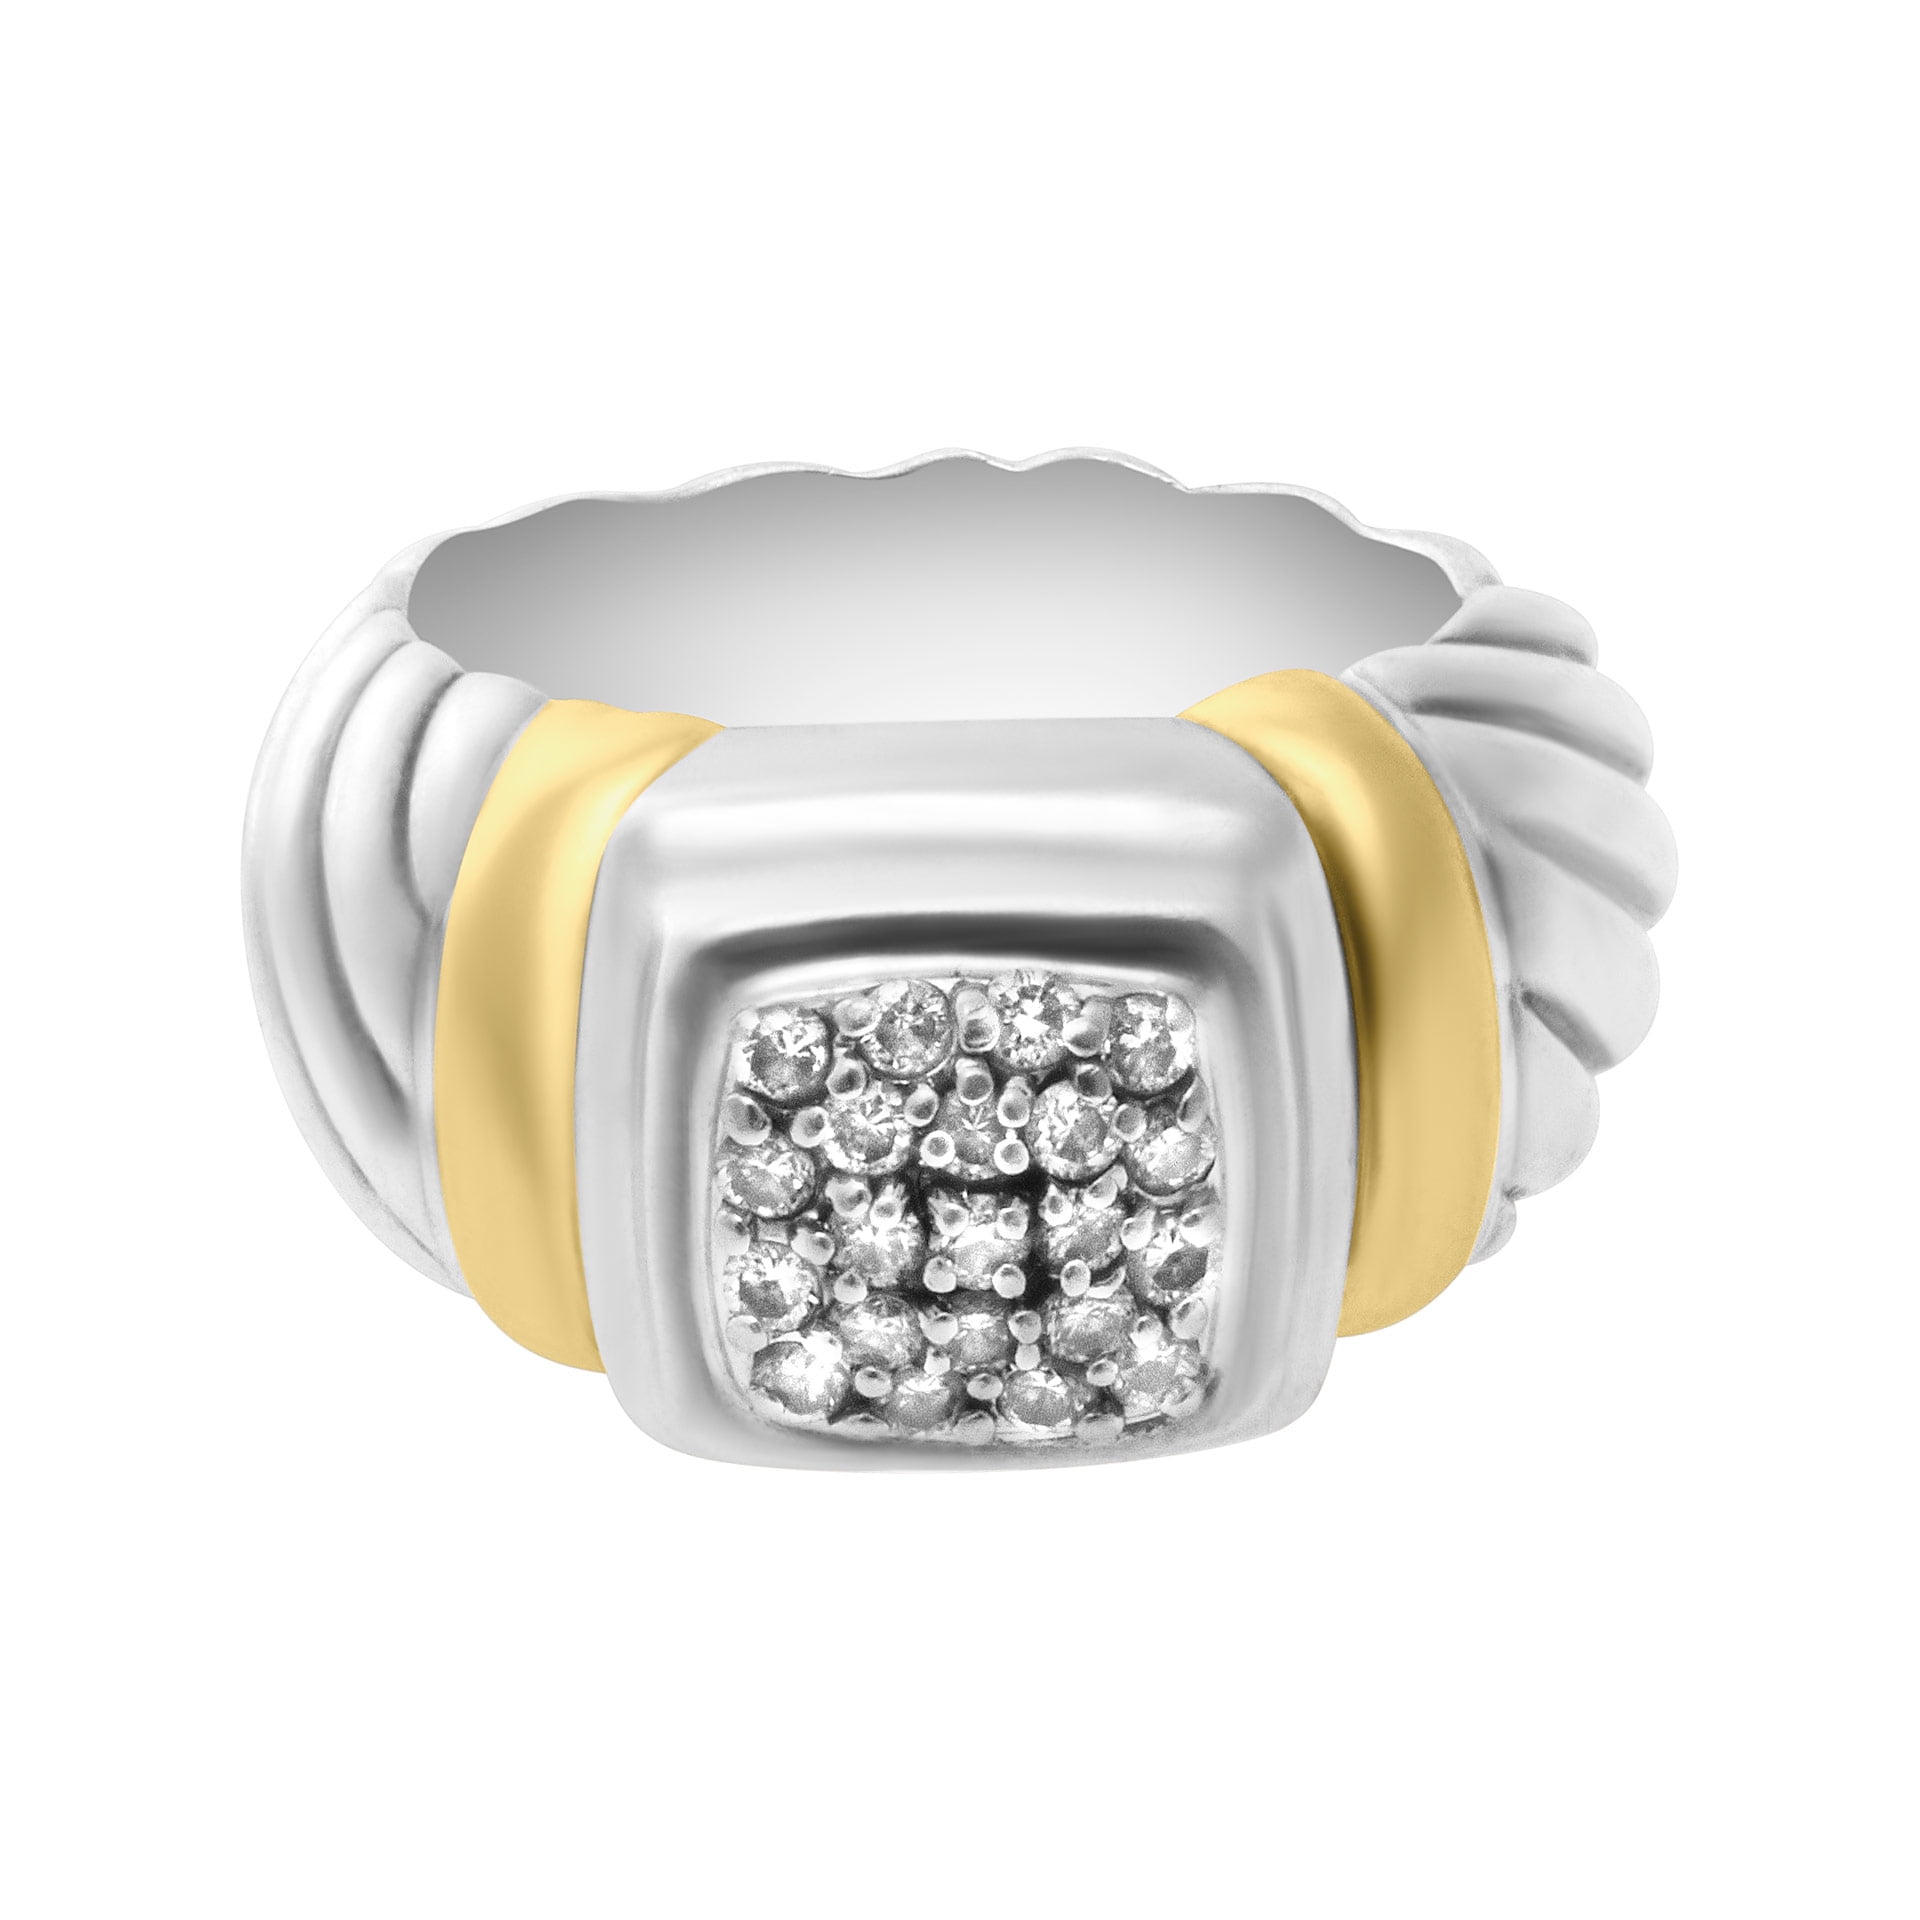 David Yurman ring in 18k yellow gold & Sterling silver with pave diamonds